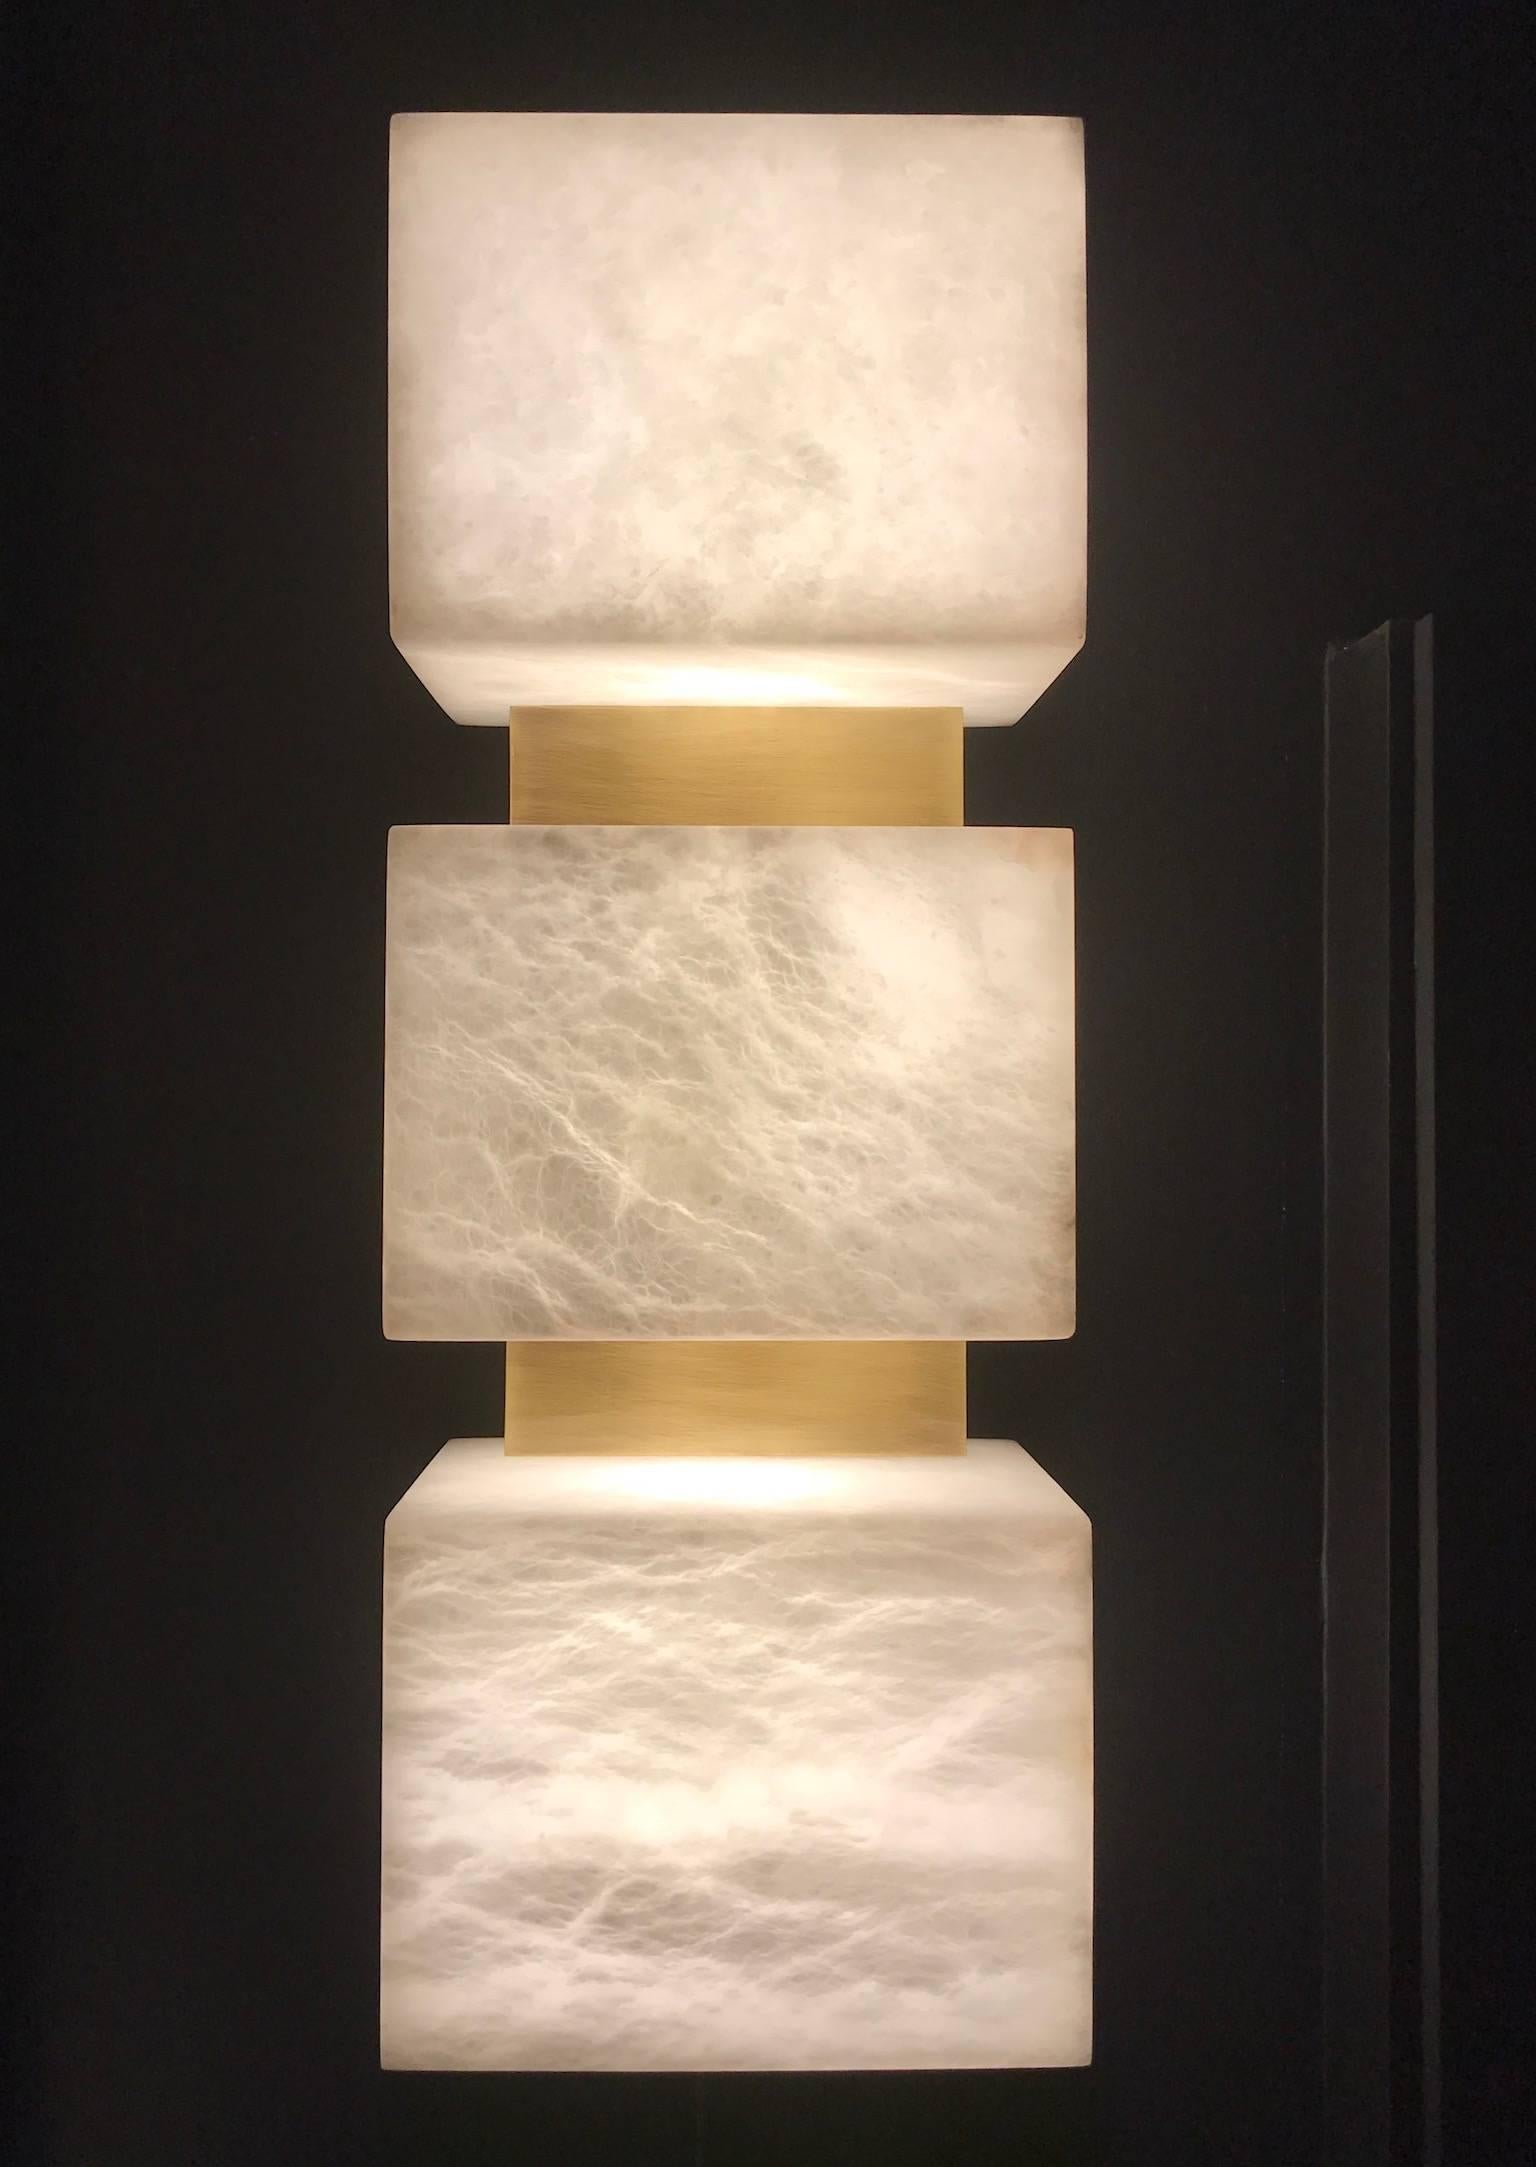 Manufactured in Italy for Charles Burnand the Scatola wall sconce is made from veined-alabaster with brushed patinated brass.

Alabaster has a unique fluidity to its appearance when back lit. Being a natural material, each piece is unique. The